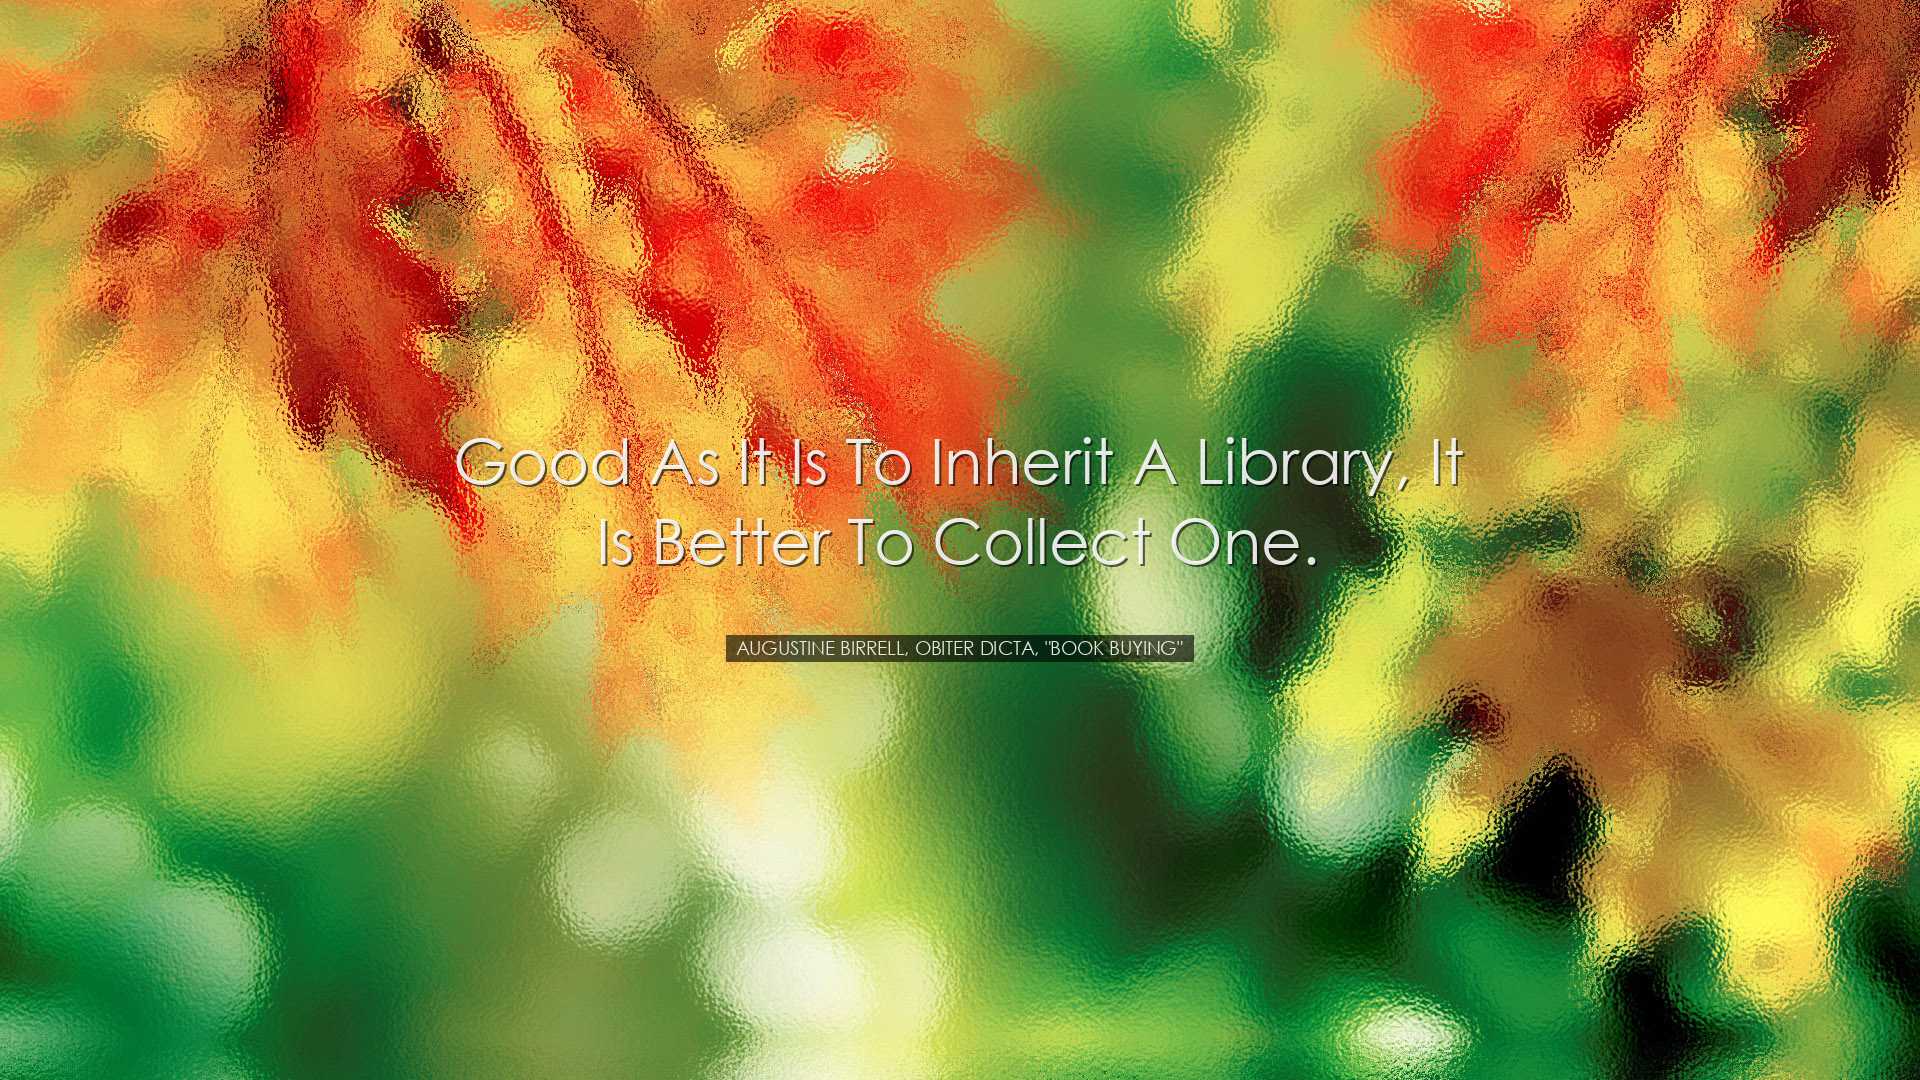 Good as it is to inherit a library, it is better to collect one. -